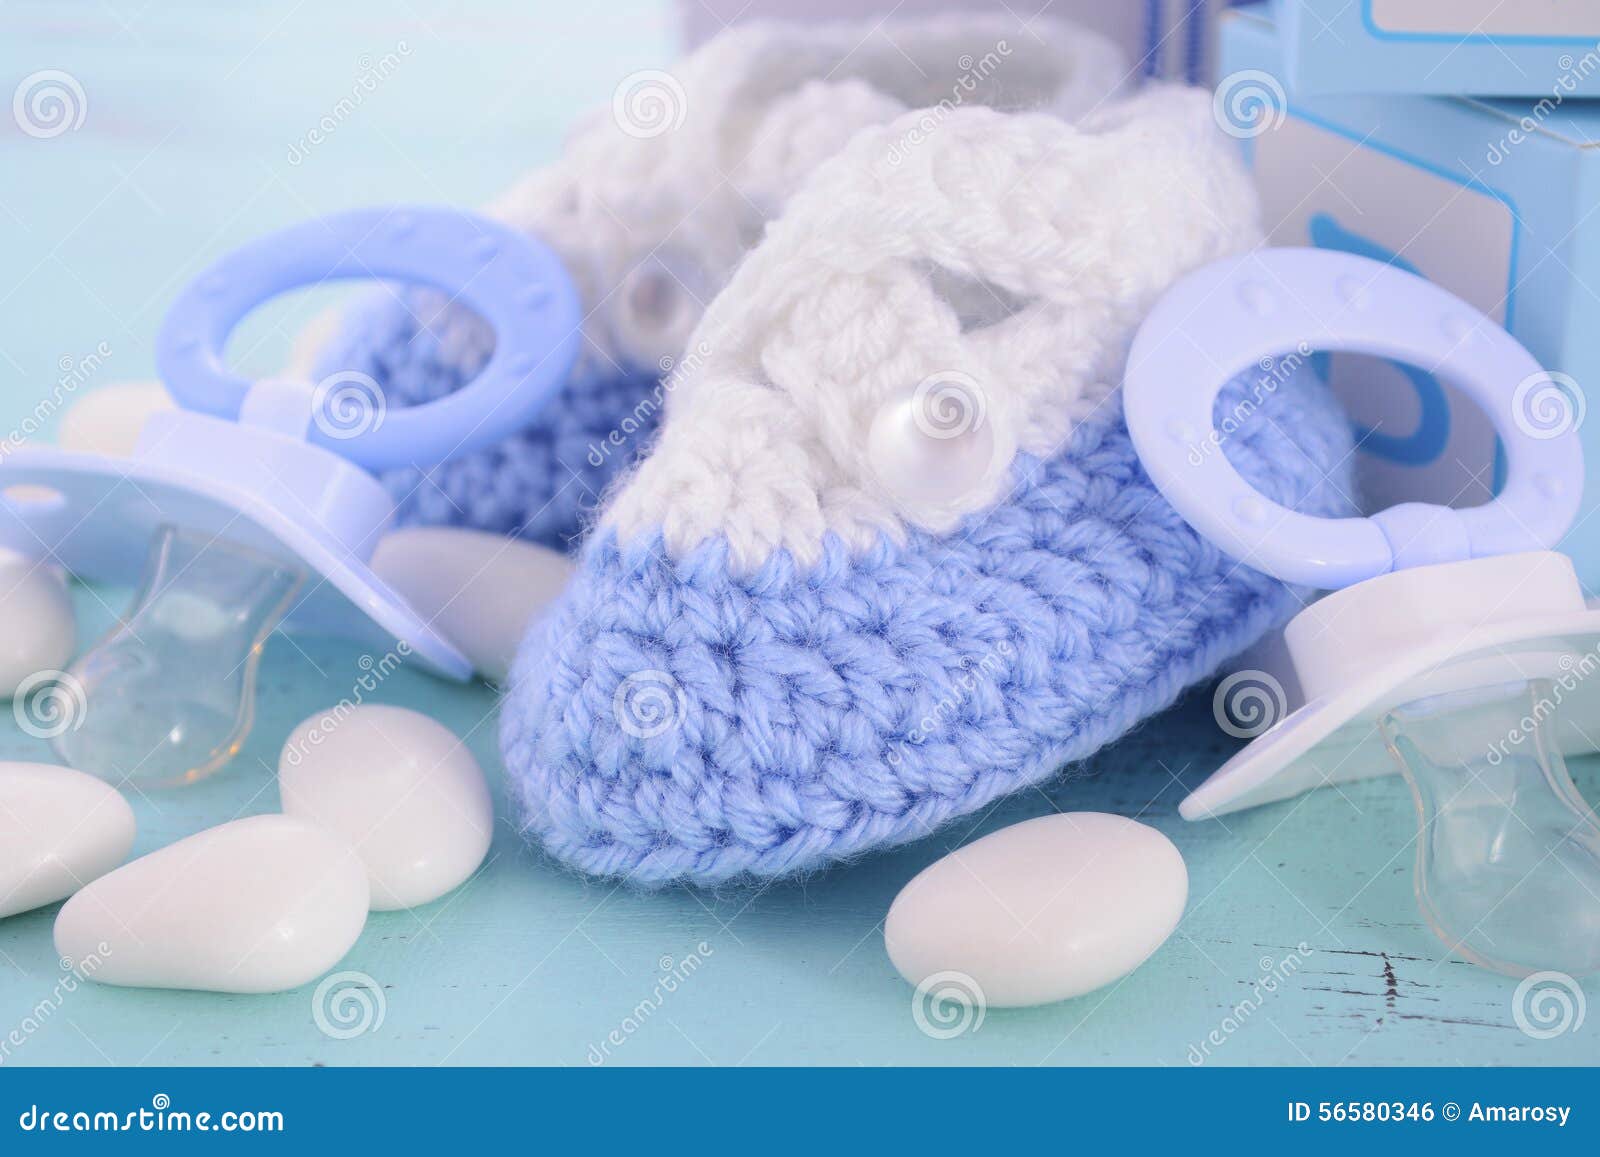 Baby Shower Its A Boy Blue Gift Stock Photo - Image: 56580346